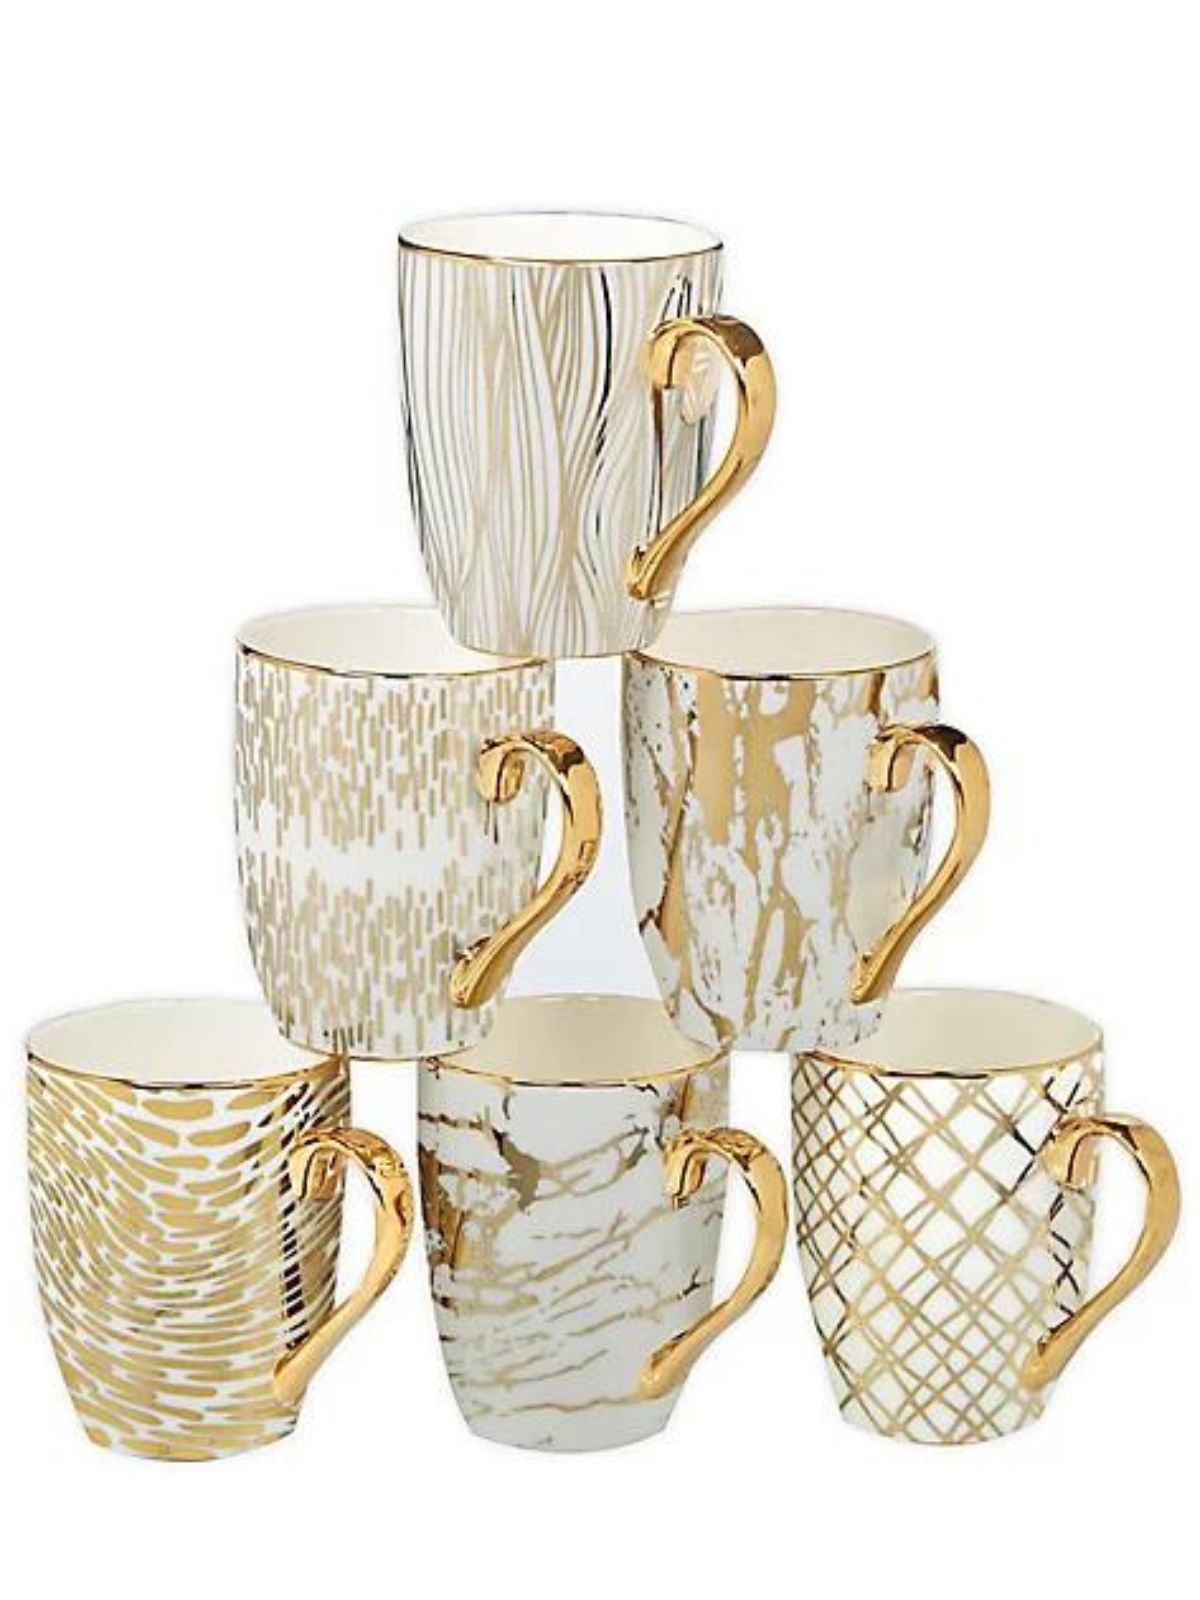 Enjoy your favorite beverage in style with this elegant matrix design gold plated mugs. Generously sized 16oz capacity featuring 6 assorted gold designs on white porcelain. 